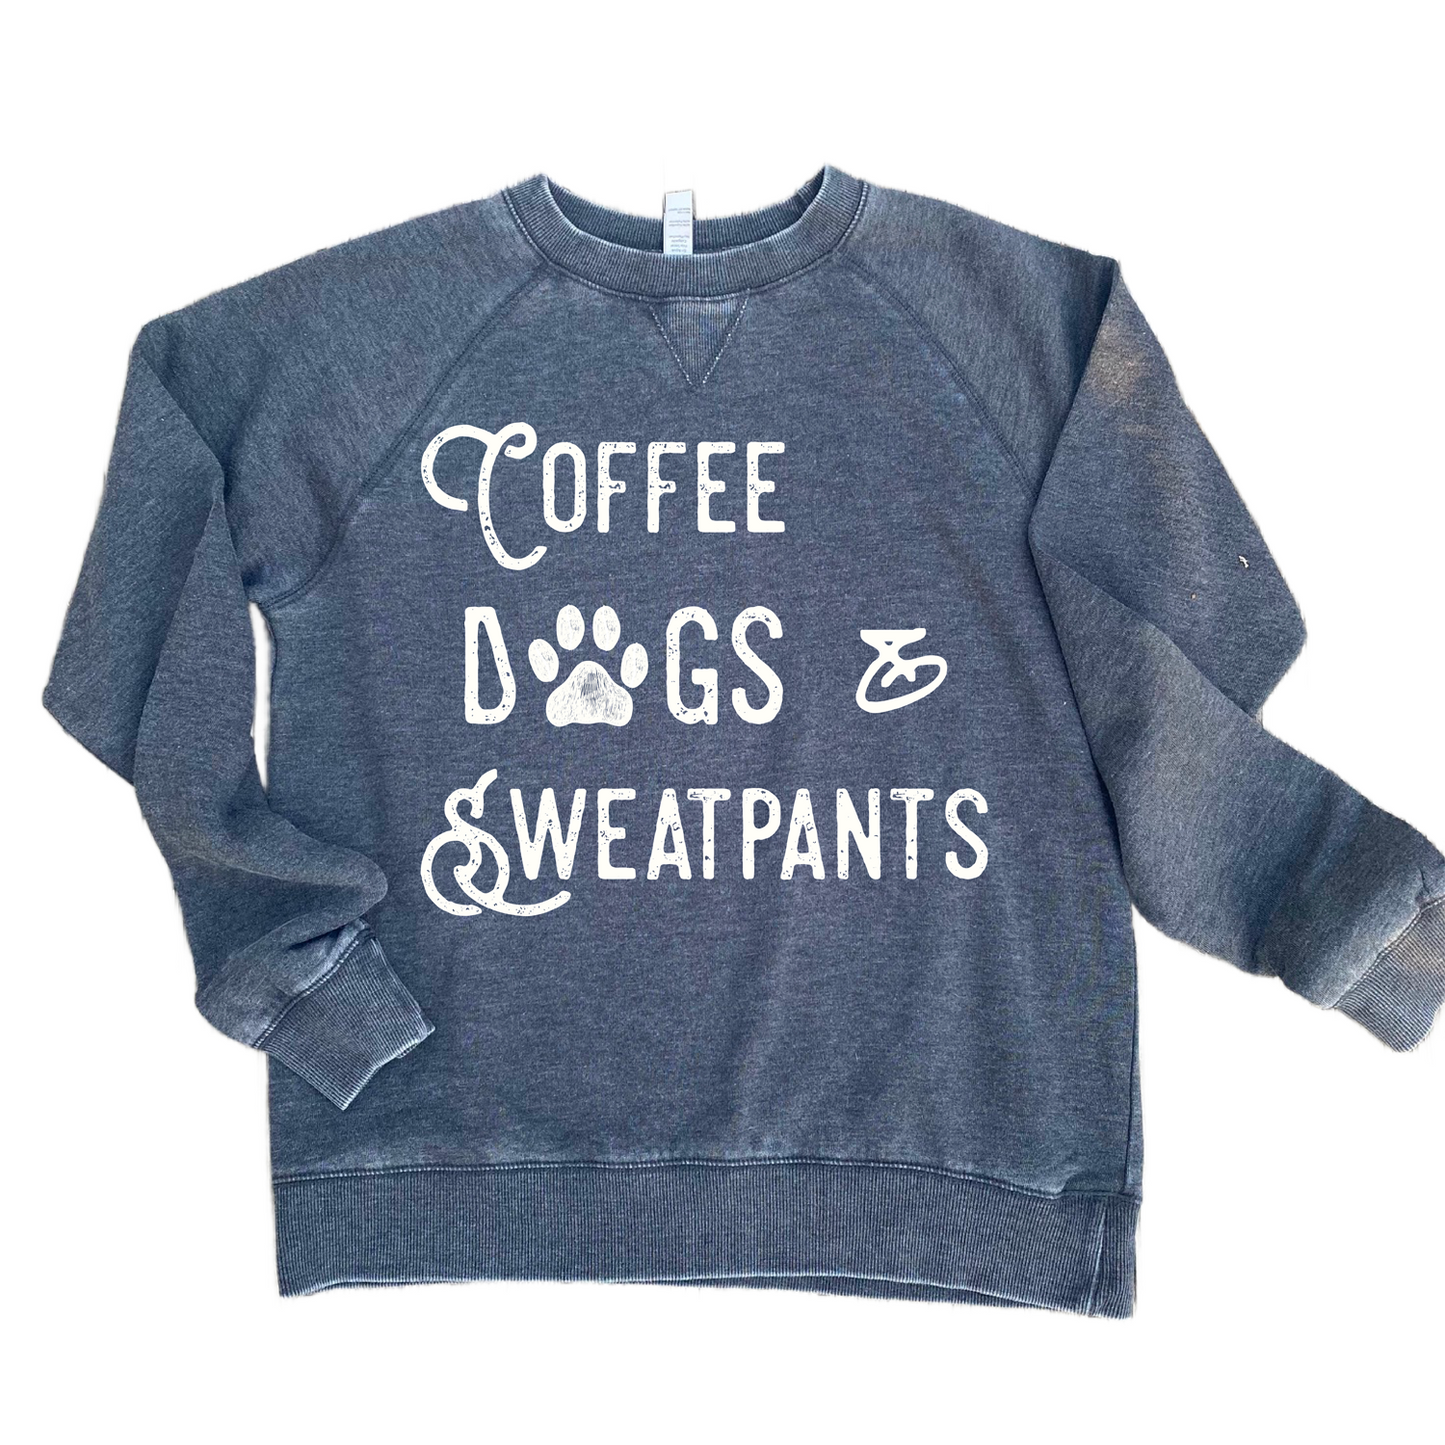 Coffee Dogs and Sweatpants Vintage Sweatshirt: 2xl - Storm and Sky Shoppe - Ales to Trails